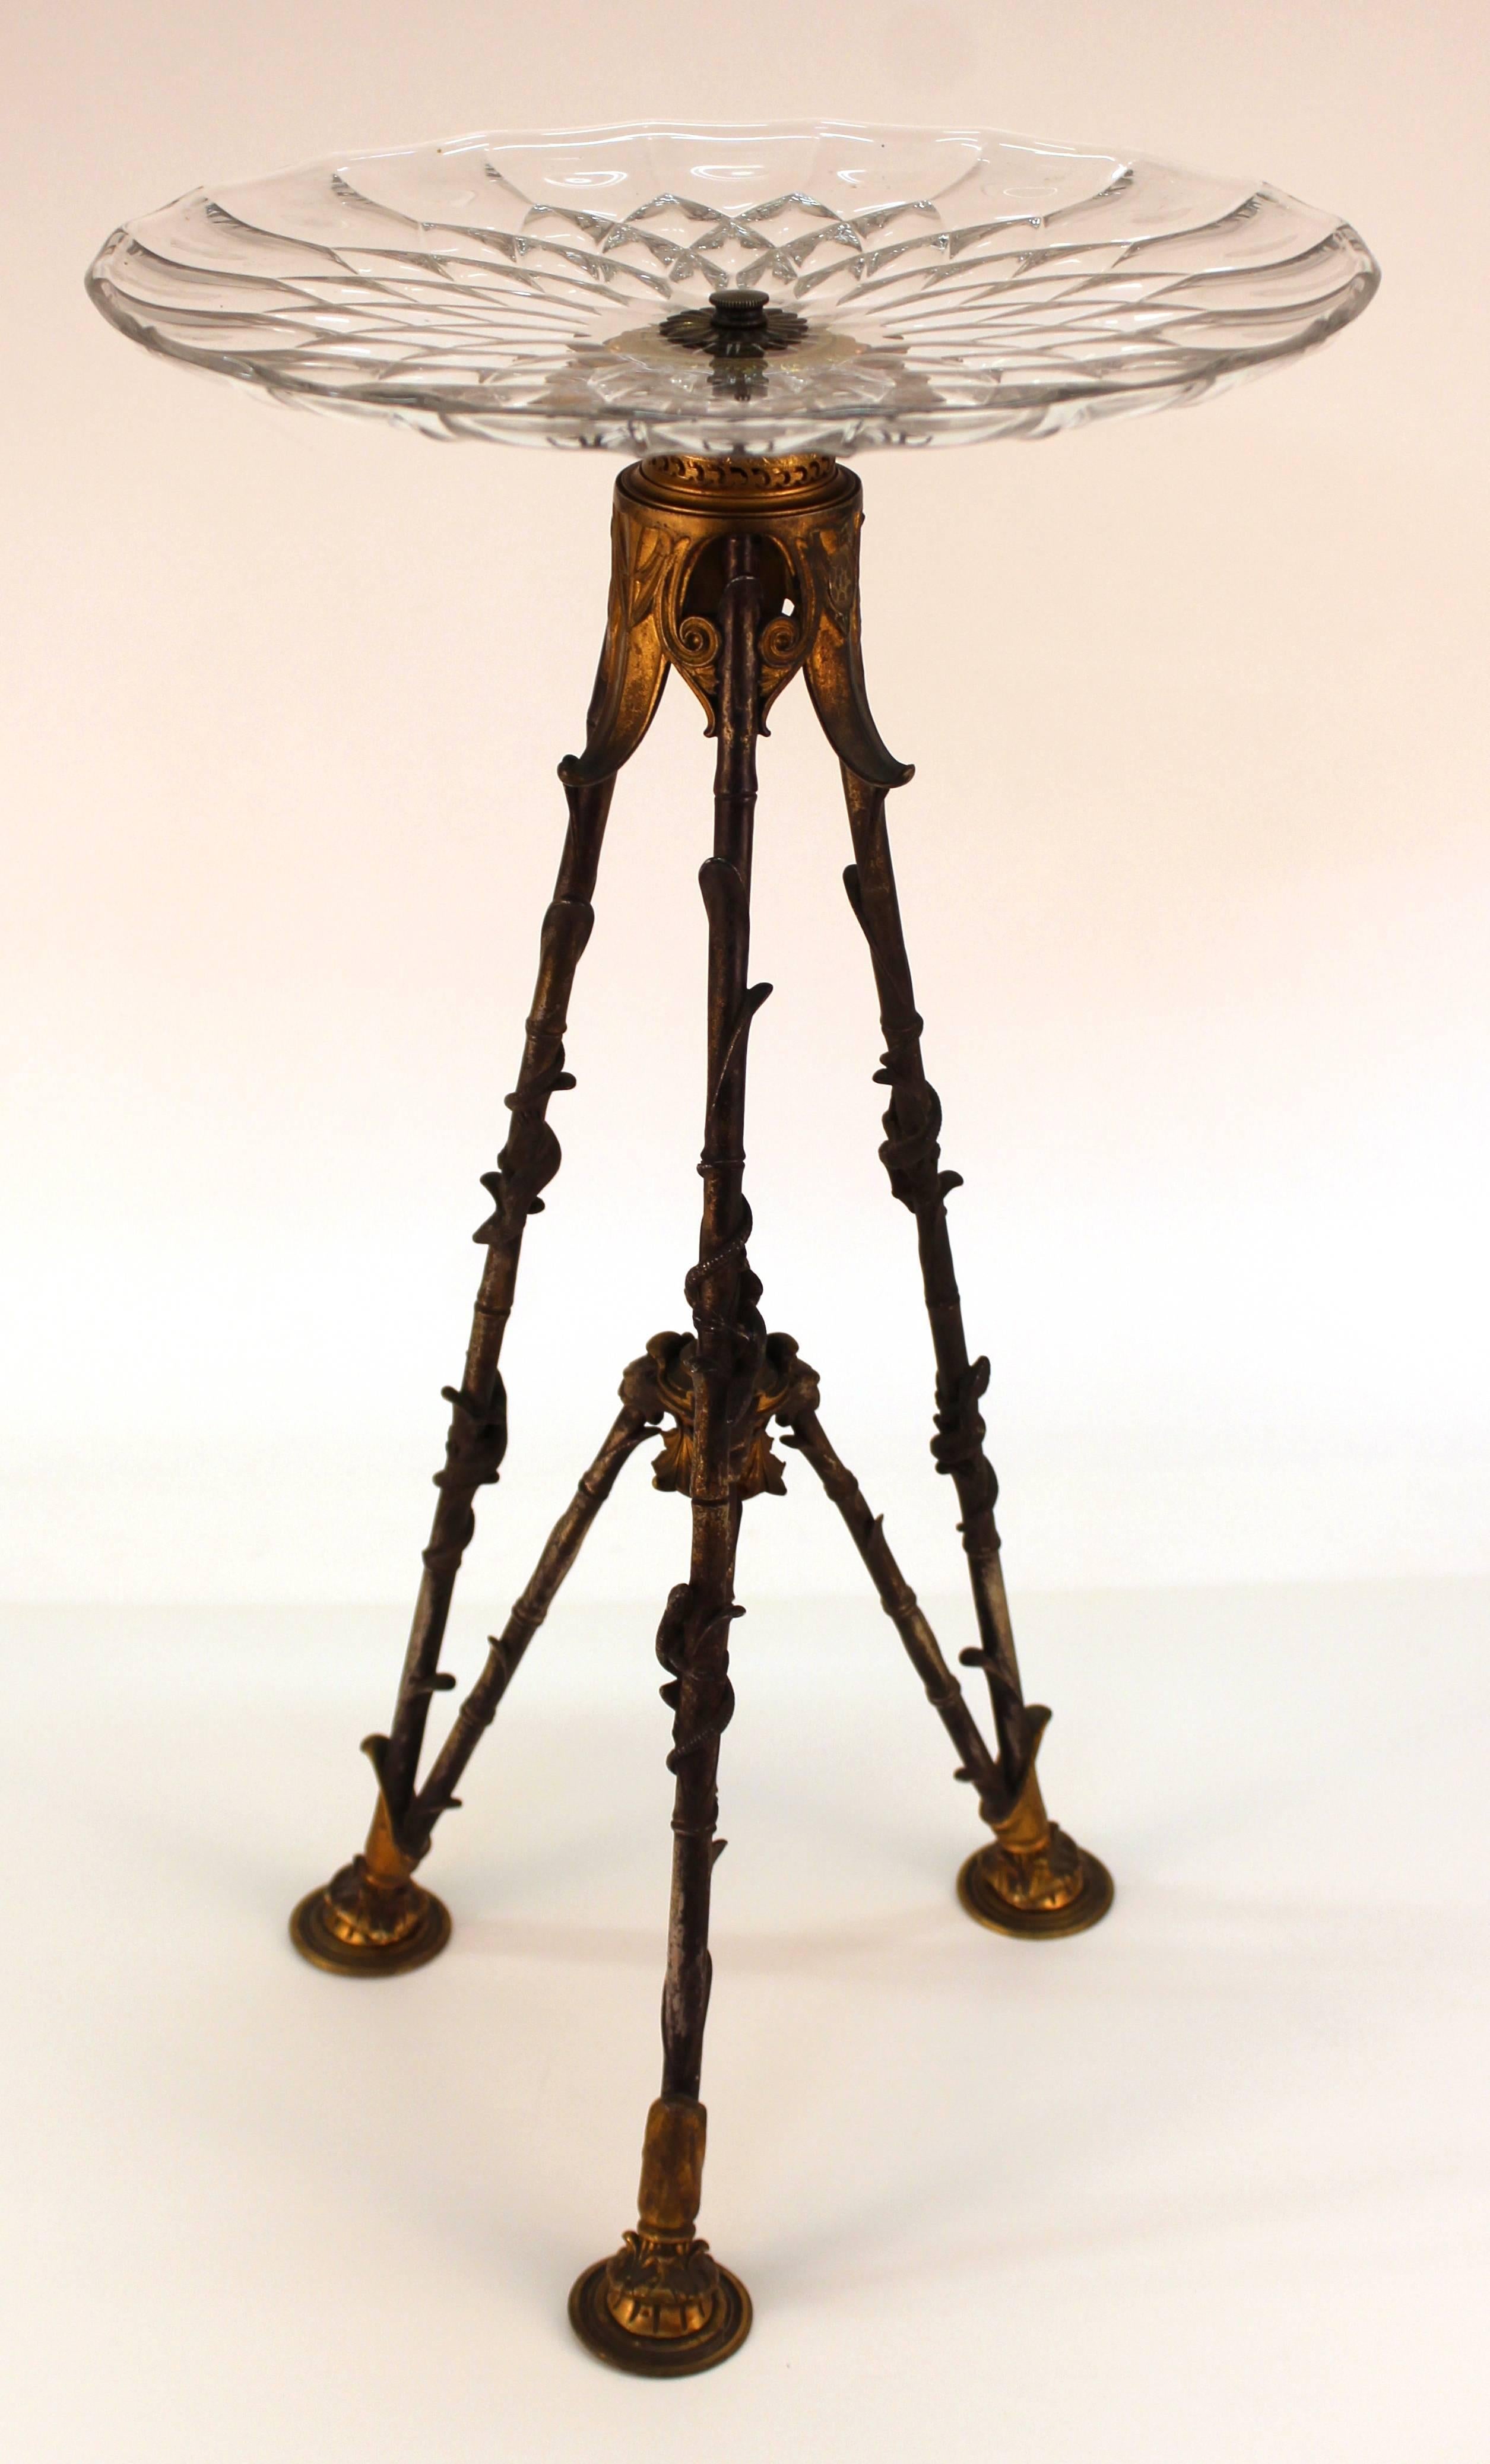 Late 19th Century French Victorian Pastry Holders on Tripod Bronze Base and Val St. Lambert Glass